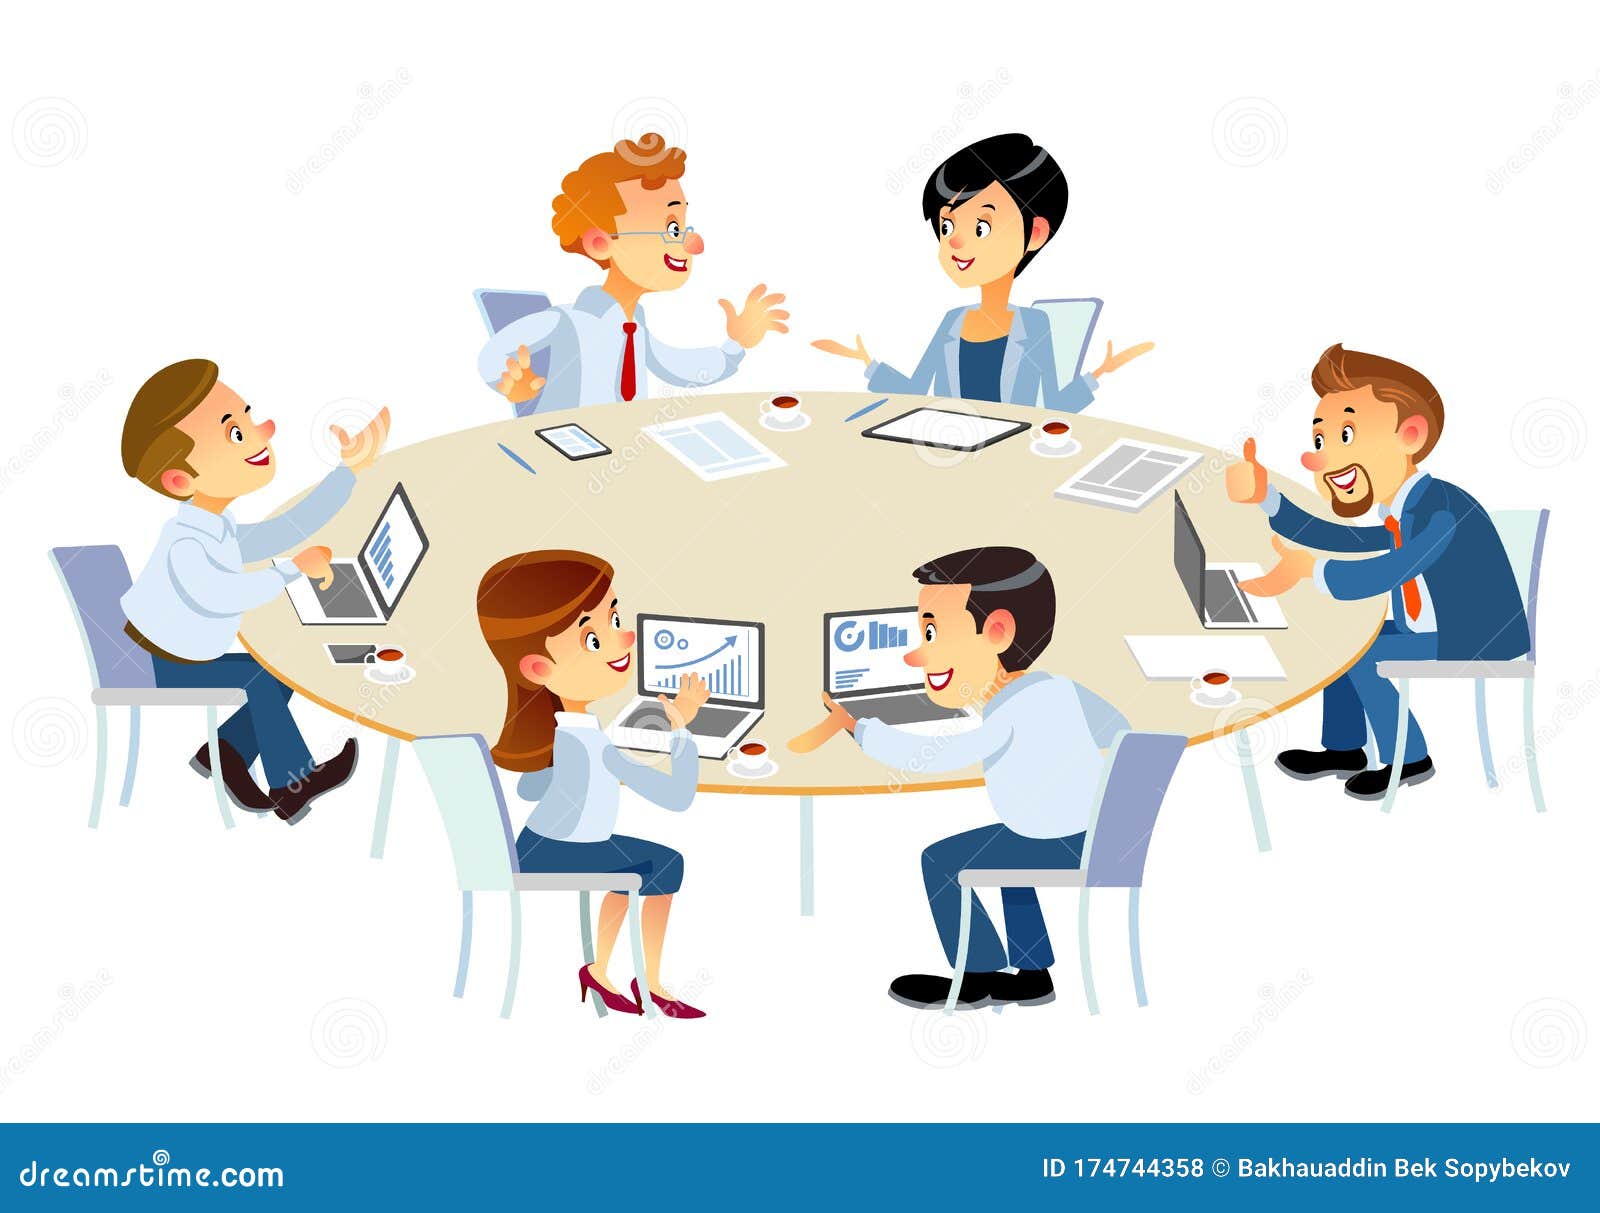 Business Partners Discussing Documents and Ideas at Meeting. Business ...